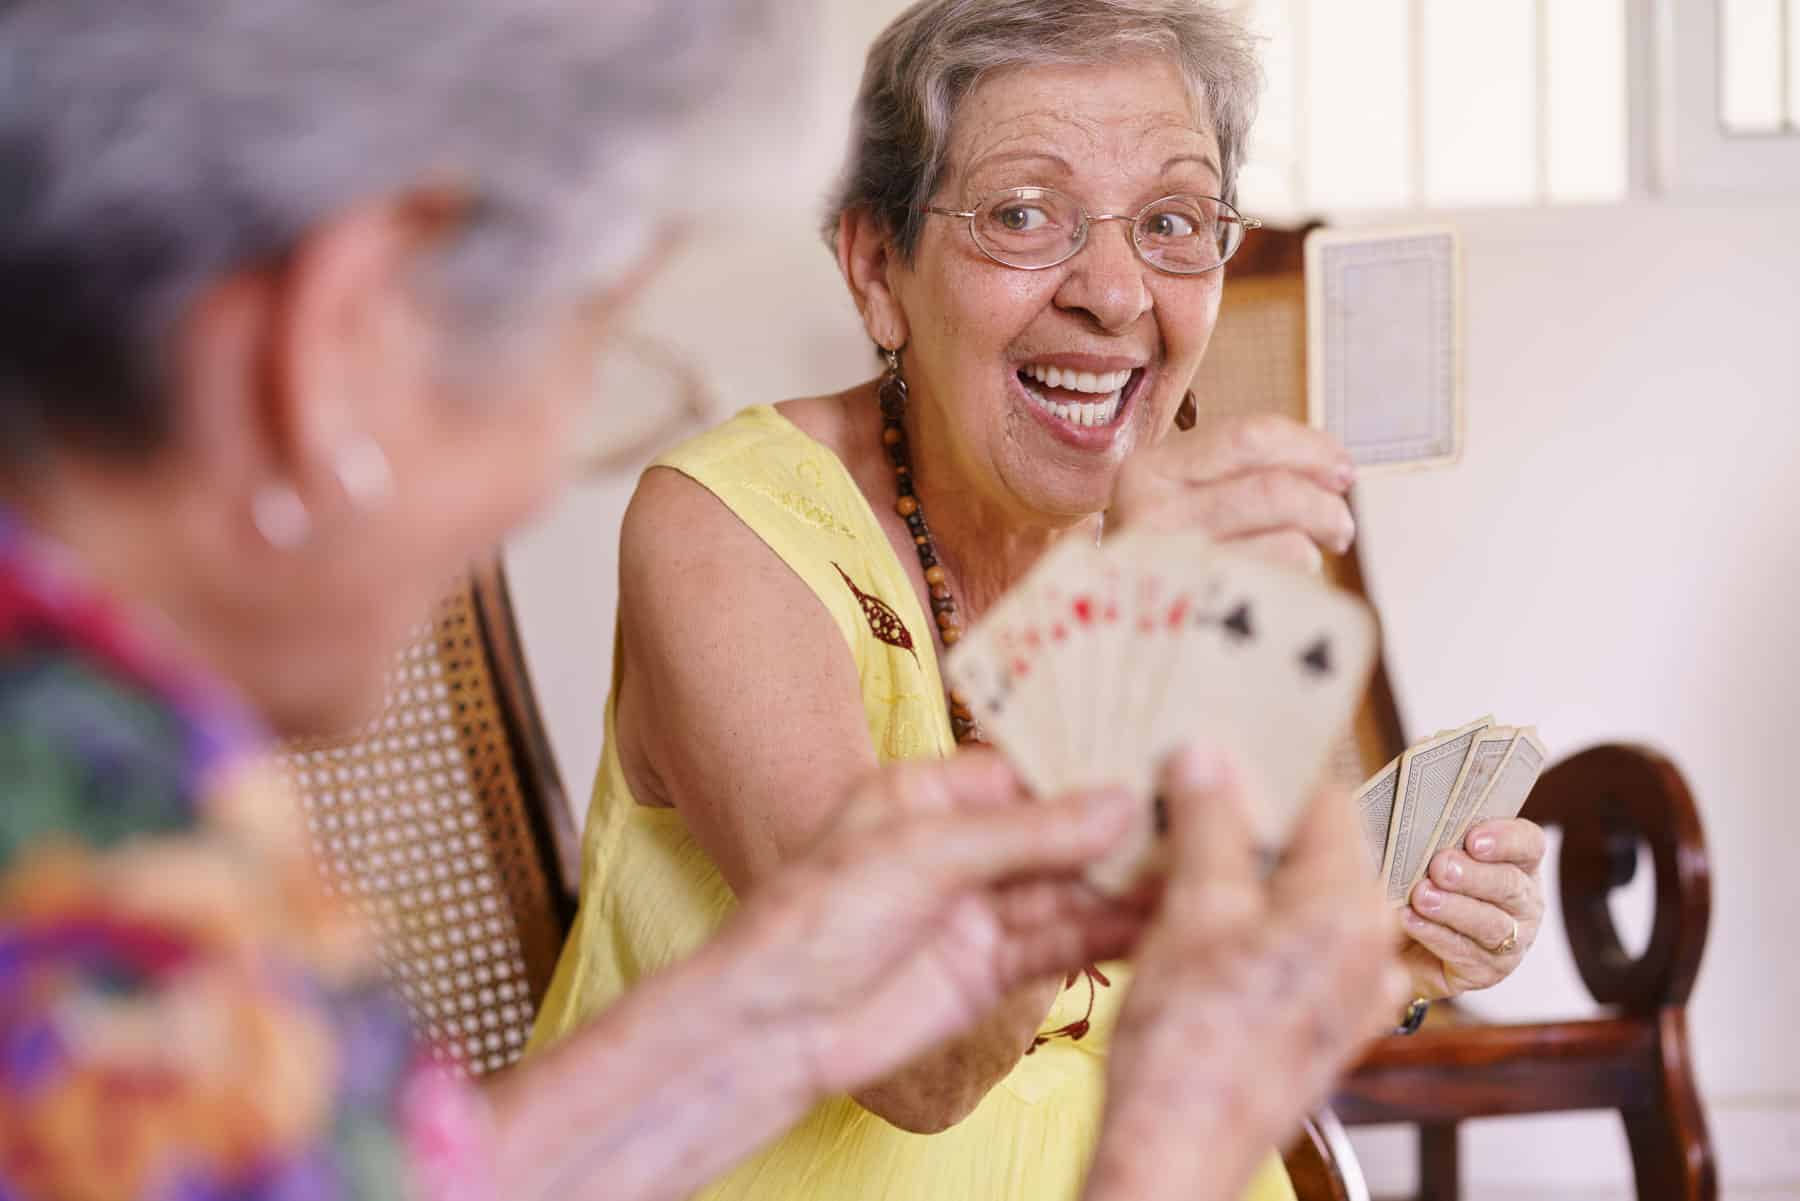 Two senior women laugh as they play cards together